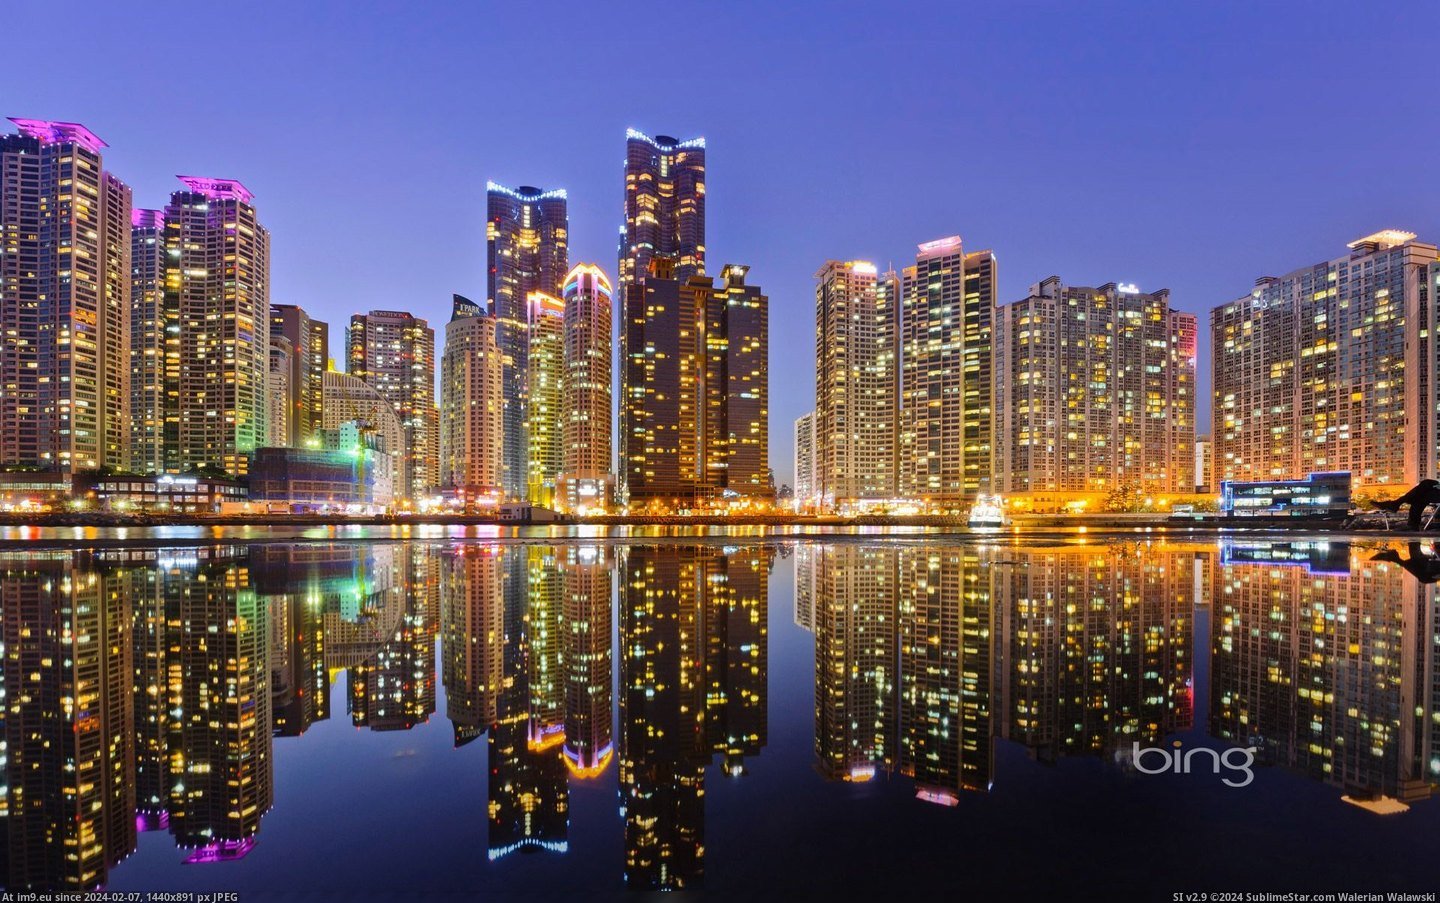 Skyline of Marine City in Busan, South Korea (Topic Photo Agency - Corbis) 2013-03-12 (in Best photos of March 2013)